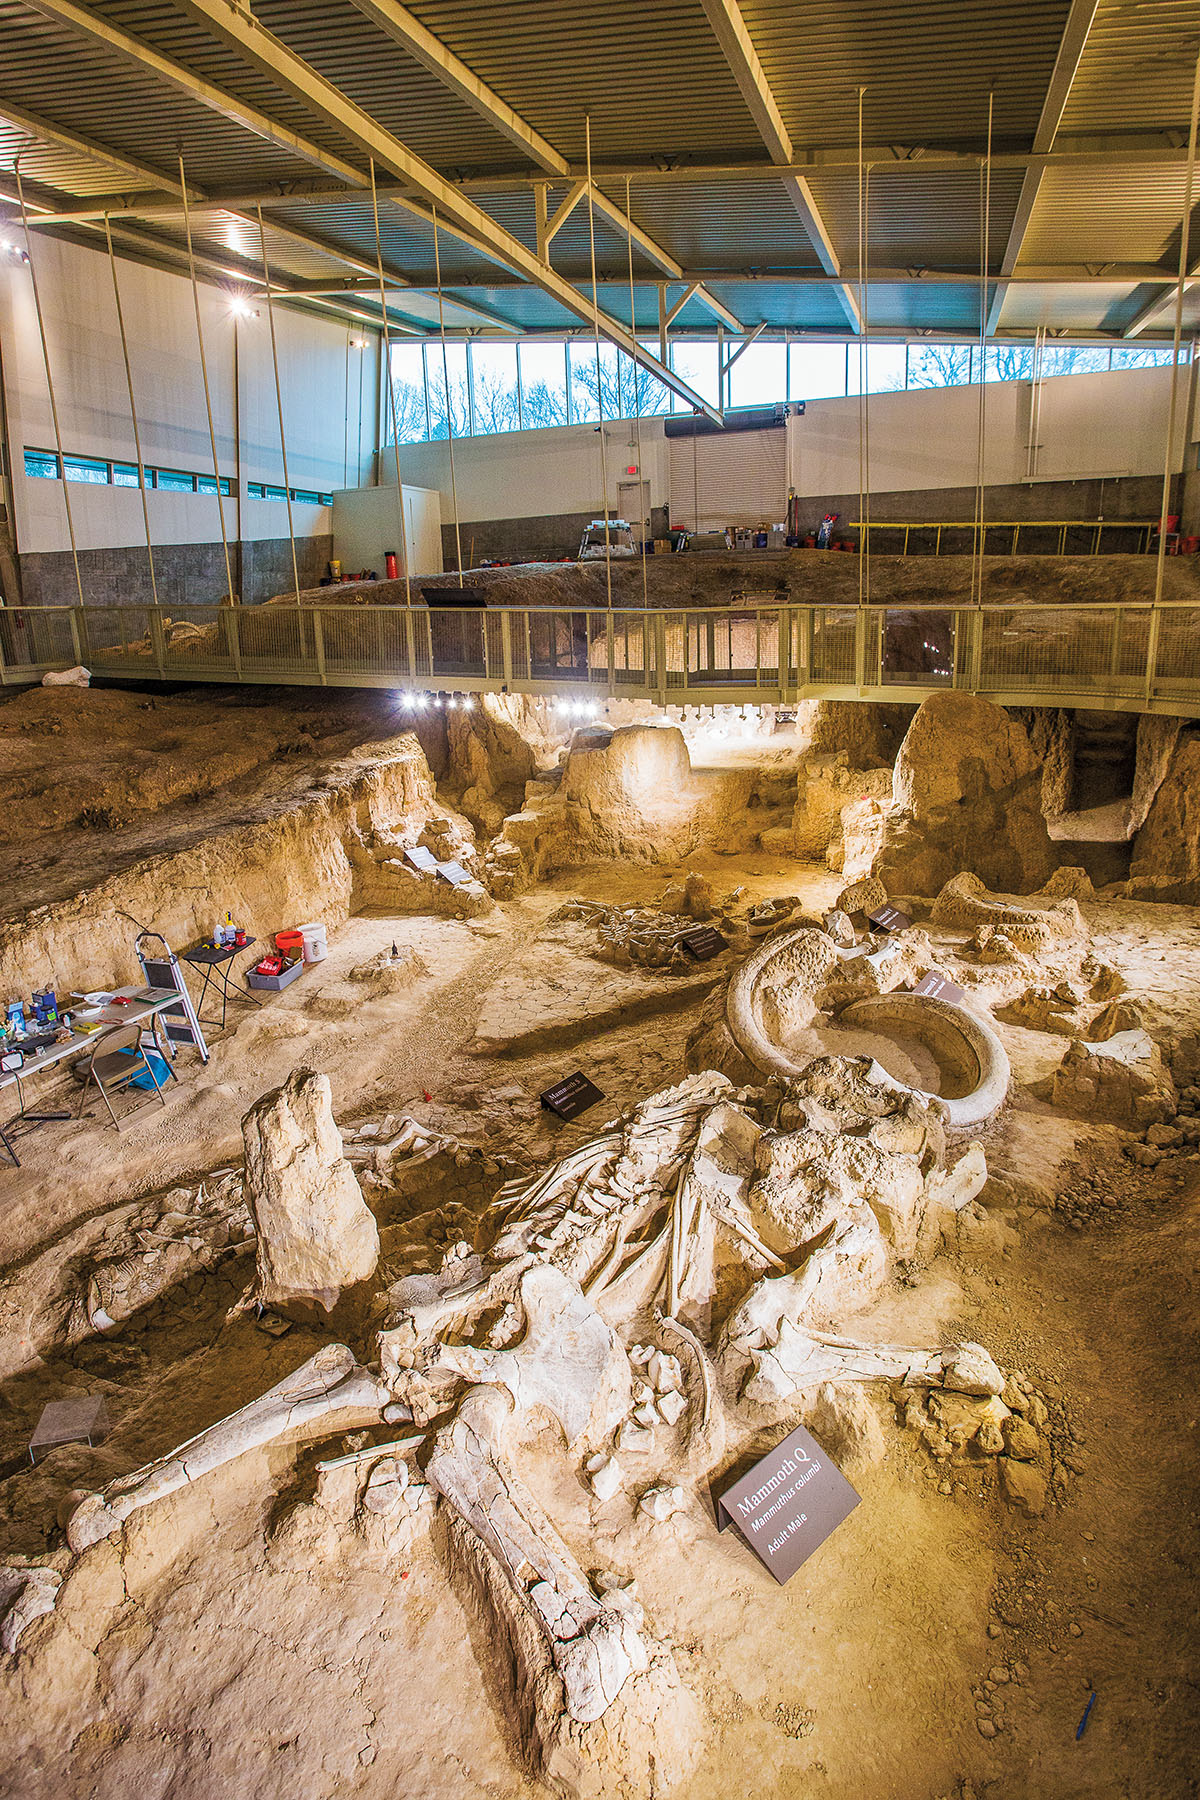 A large fossil dig site covered by lights and an enclosure